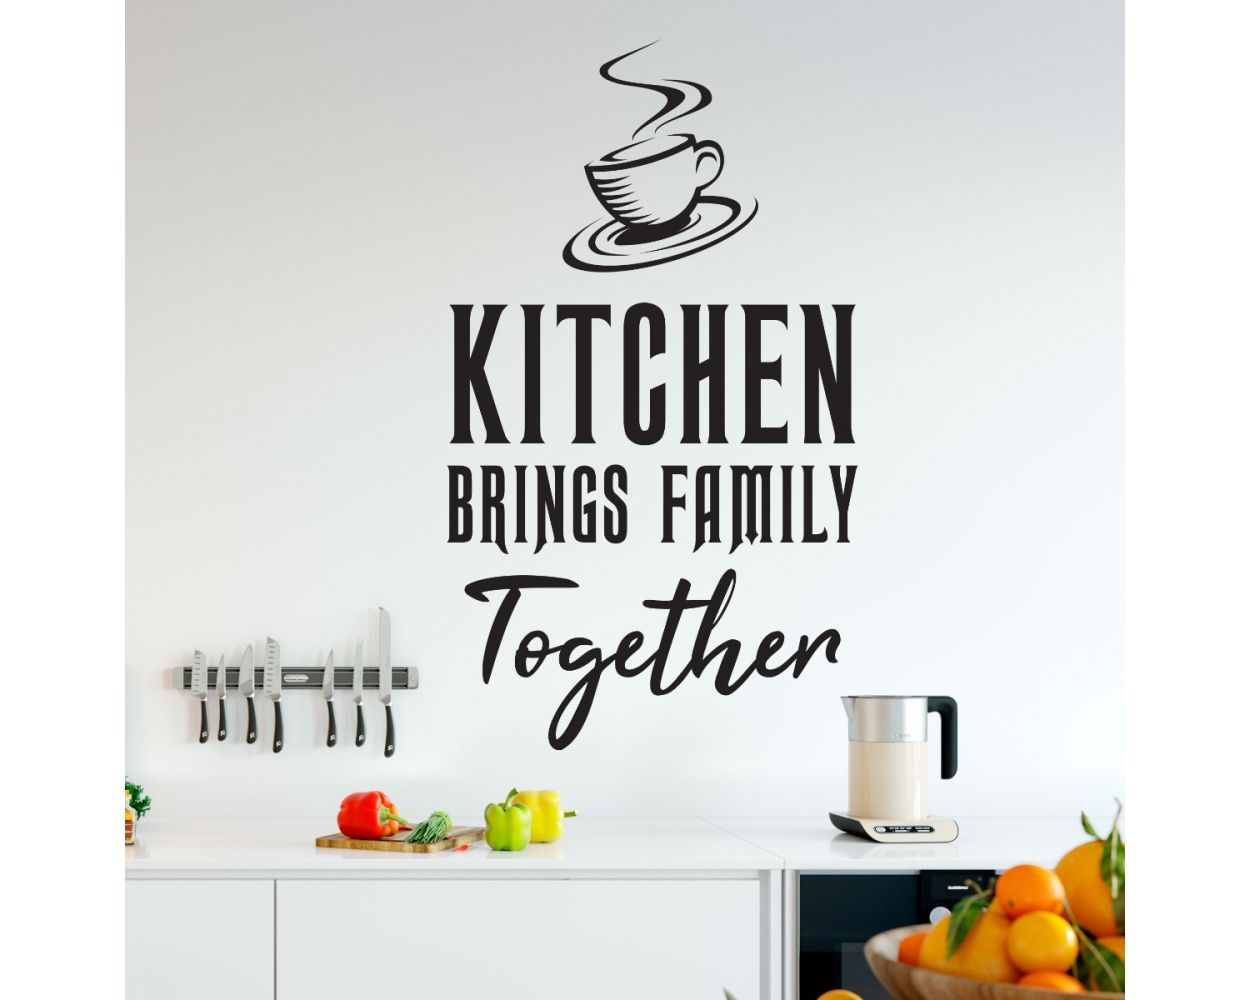 Kitchen Brings Family Together Quotes Kitchen Wall Stickers 